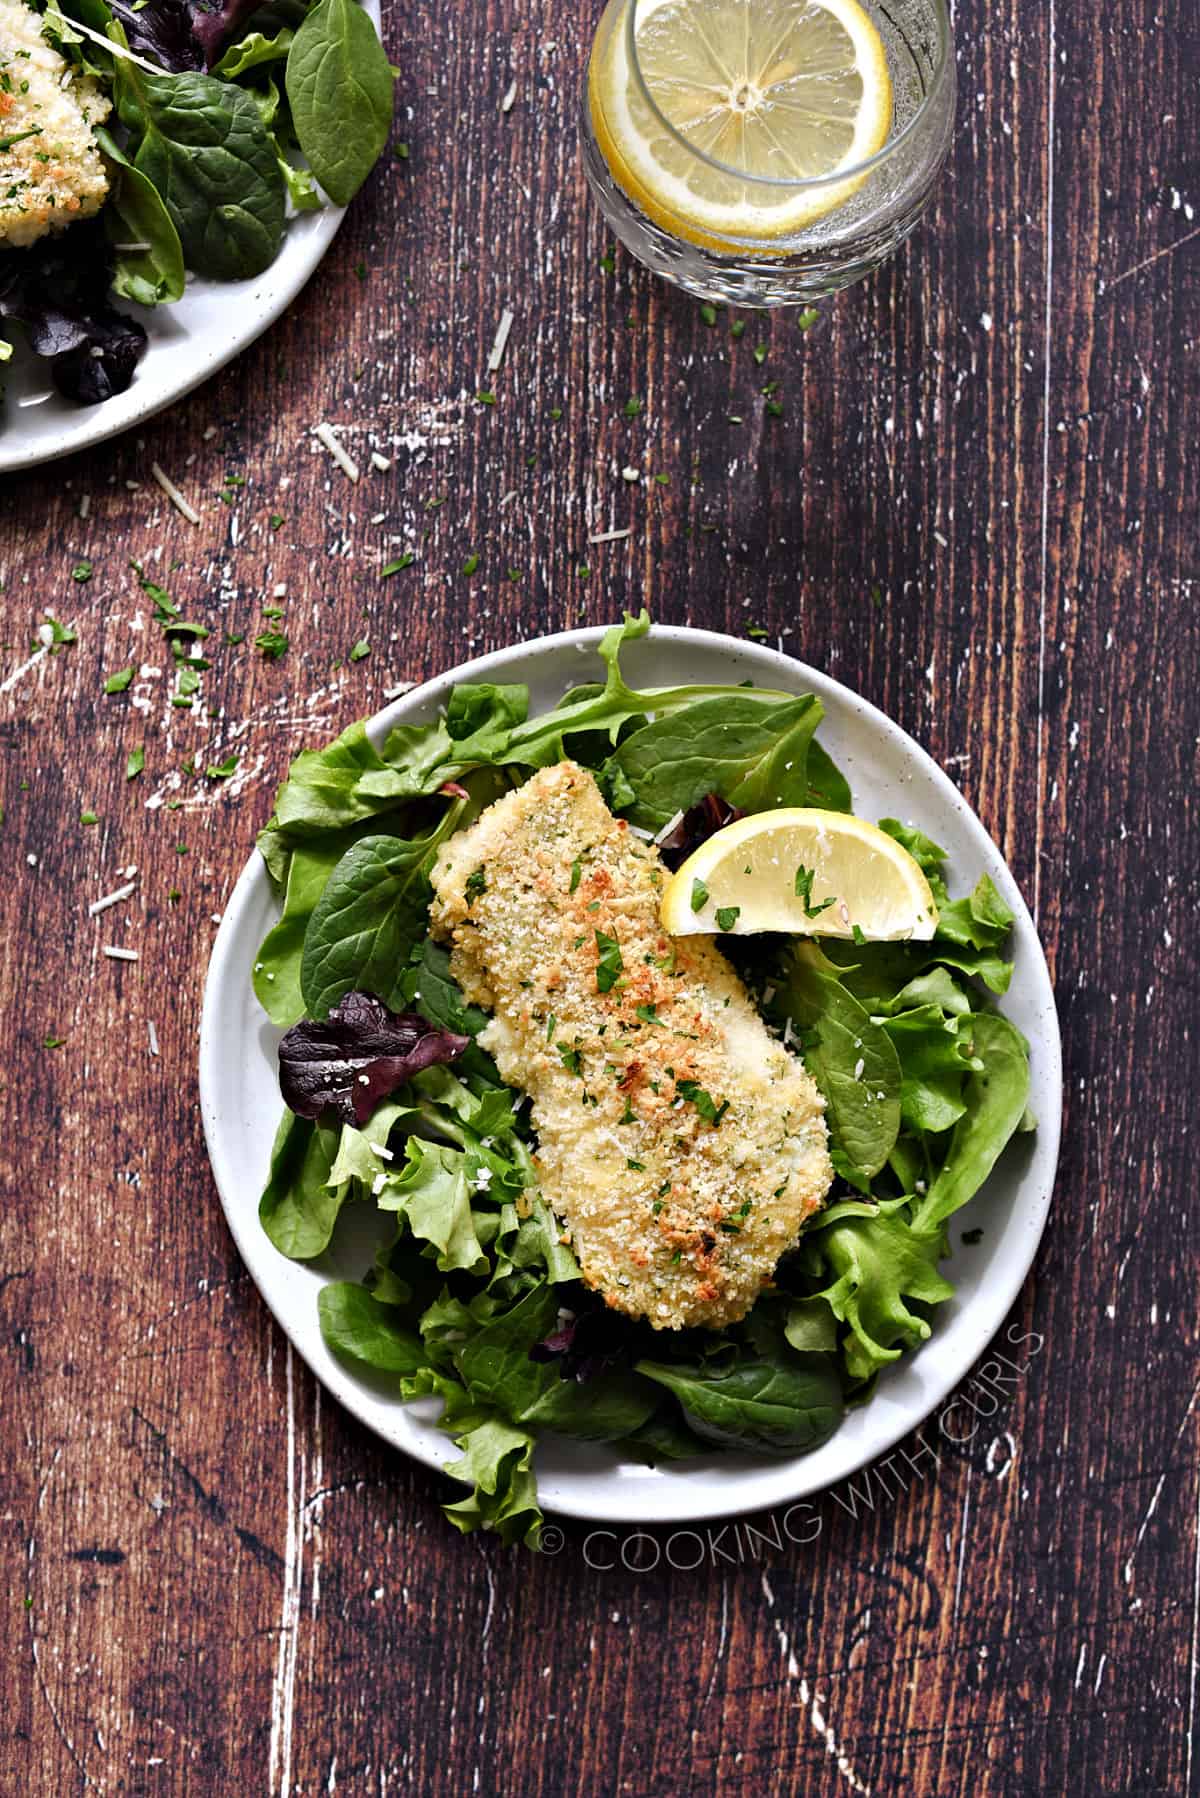 Looking down on a panko crusted fish filet on a bed of leafy greens with a lemon wedge on the side.